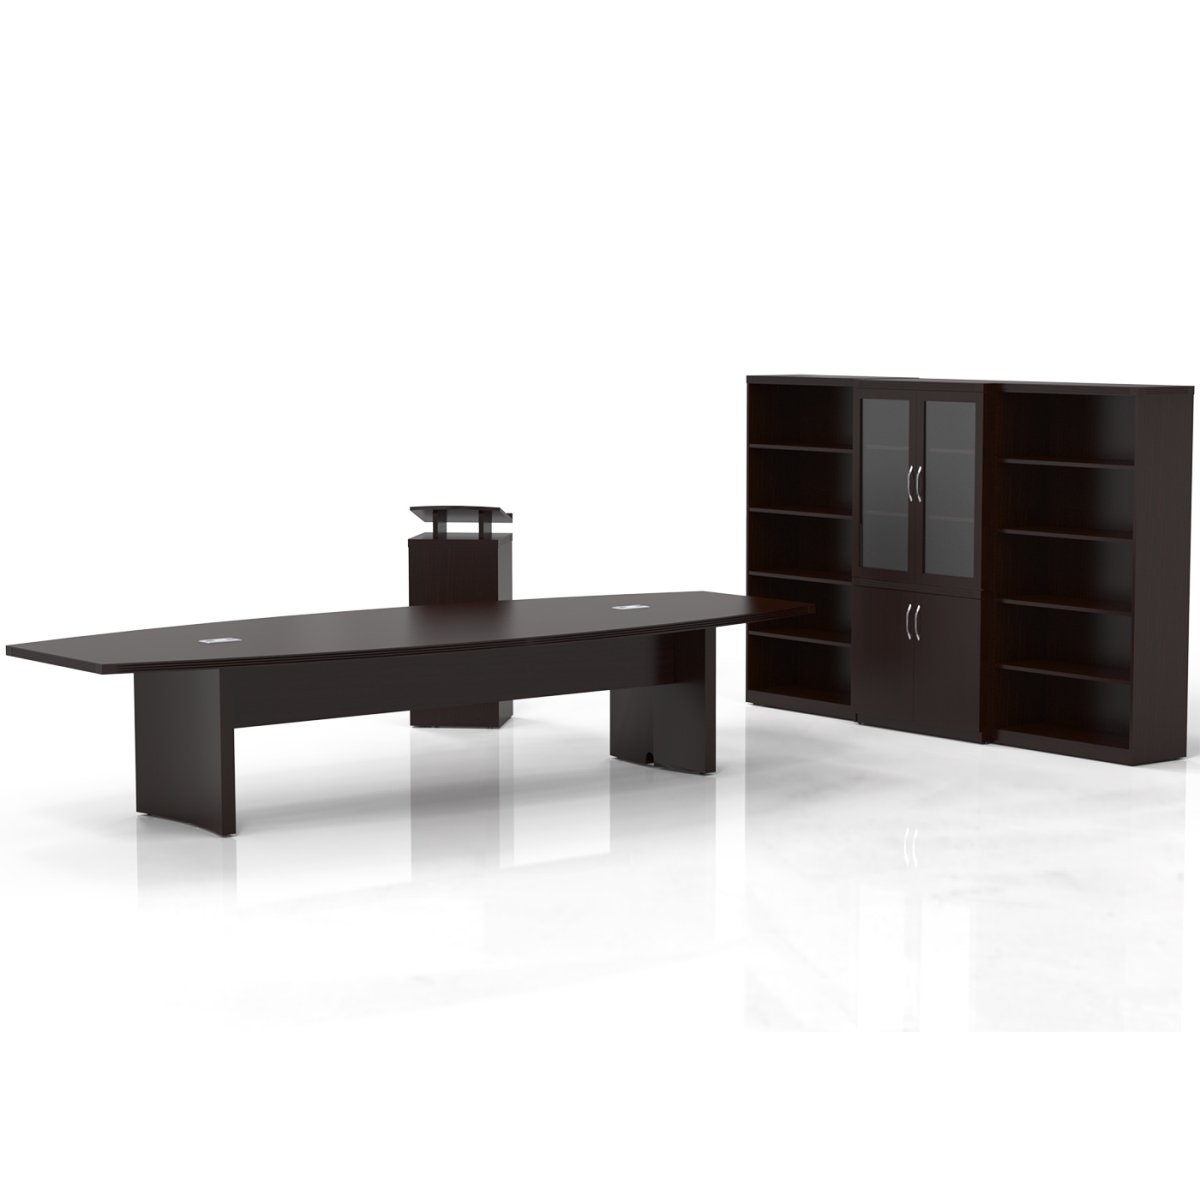 At40ldc 11 Ft. X 17 In. Aberdeen Series Suite 40 Conference Room Desk, Mocha